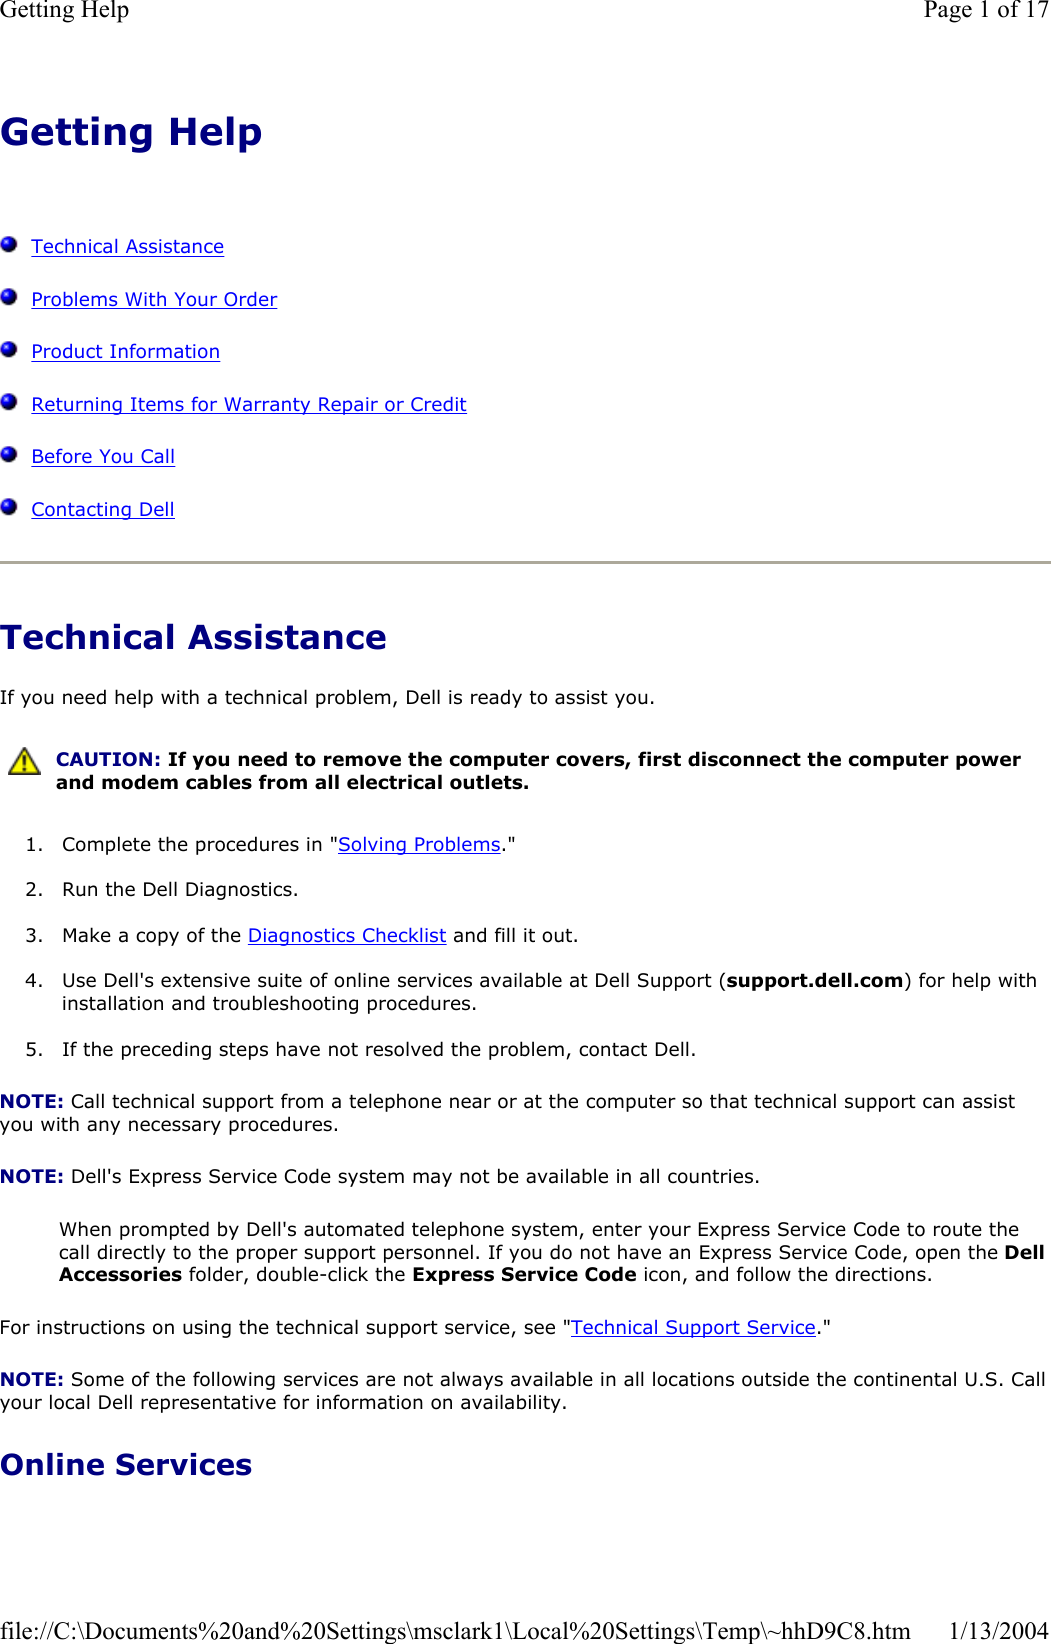 Getting HelpTechnical AssistanceProblems With Your OrderProduct InformationReturning Items for Warranty Repair or CreditBefore You CallContacting DellTechnical Assistance If you need help with a technical problem, Dell is ready to assist you. 1. Complete the procedures in &quot;Solving Problems.&quot;2. Run the Dell Diagnostics. 3. Make a copy of the Diagnostics Checklist and fill it out. 4. Use Dell&apos;s extensive suite of online services available at Dell Support (support.dell.com) for help with installation and troubleshooting procedures. 5. If the preceding steps have not resolved the problem, contact Dell. NOTE: Call technical support from a telephone near or at the computer so that technical support can assist you with any necessary procedures. NOTE: Dell&apos;s Express Service Code system may not be available in all countries. When prompted by Dell&apos;s automated telephone system, enter your Express Service Code to route the call directly to the proper support personnel. If you do not have an Express Service Code, open the DellAccessories folder, double-click the Express Service Code icon, and follow the directions. For instructions on using the technical support service, see &quot;Technical Support Service.&quot;NOTE: Some of the following services are not always available in all locations outside the continental U.S. Callyour local Dell representative for information on availability. Online Services CAUTION: If you need to remove the computer covers, first disconnect the computer power and modem cables from all electrical outlets. Page 1 of 17Getting Help1/13/2004file://C:\Documents%20and%20Settings\msclark1\Local%20Settings\Temp\~hhD9C8.htm